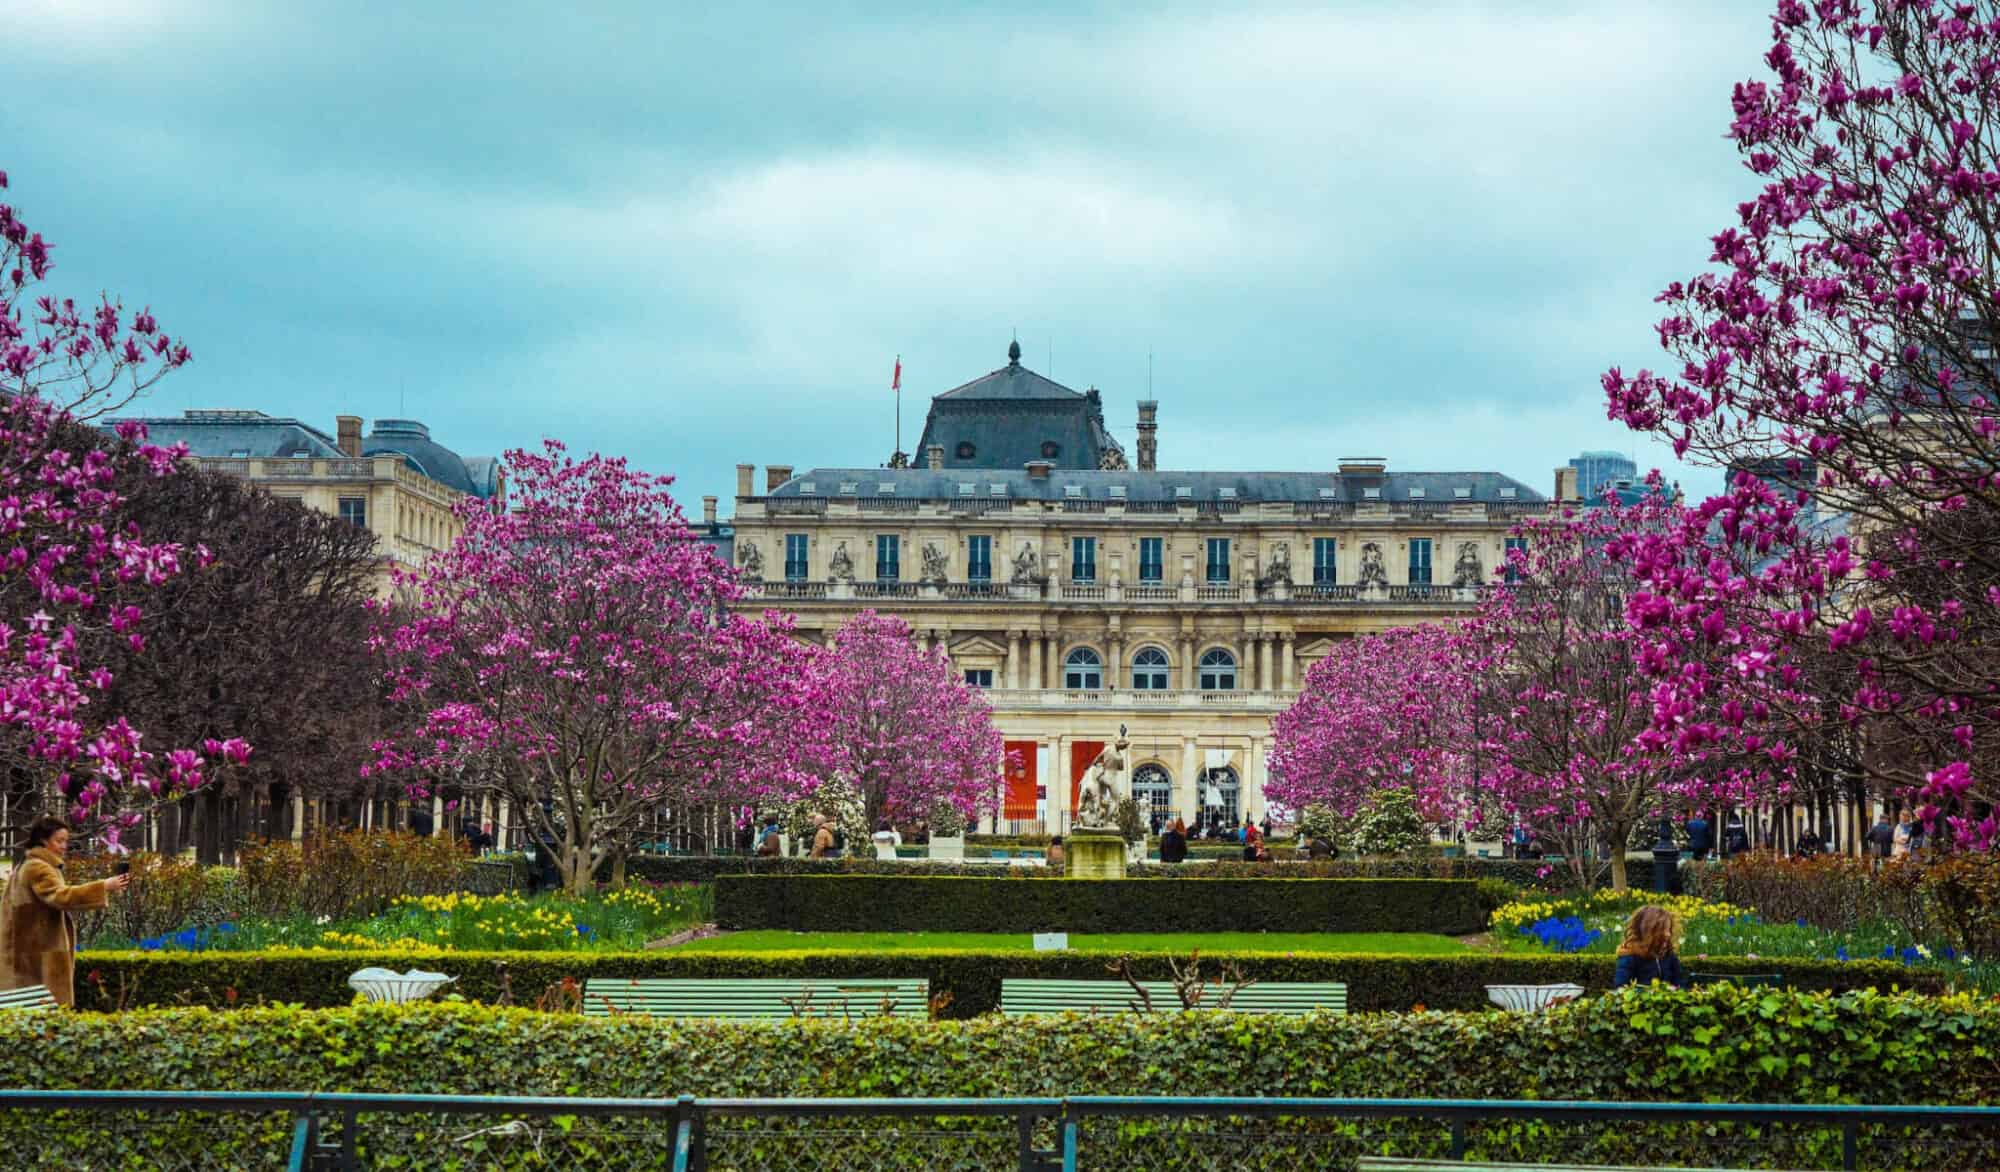 Paris in the Spring: The Effect of Sunlight on Parisians